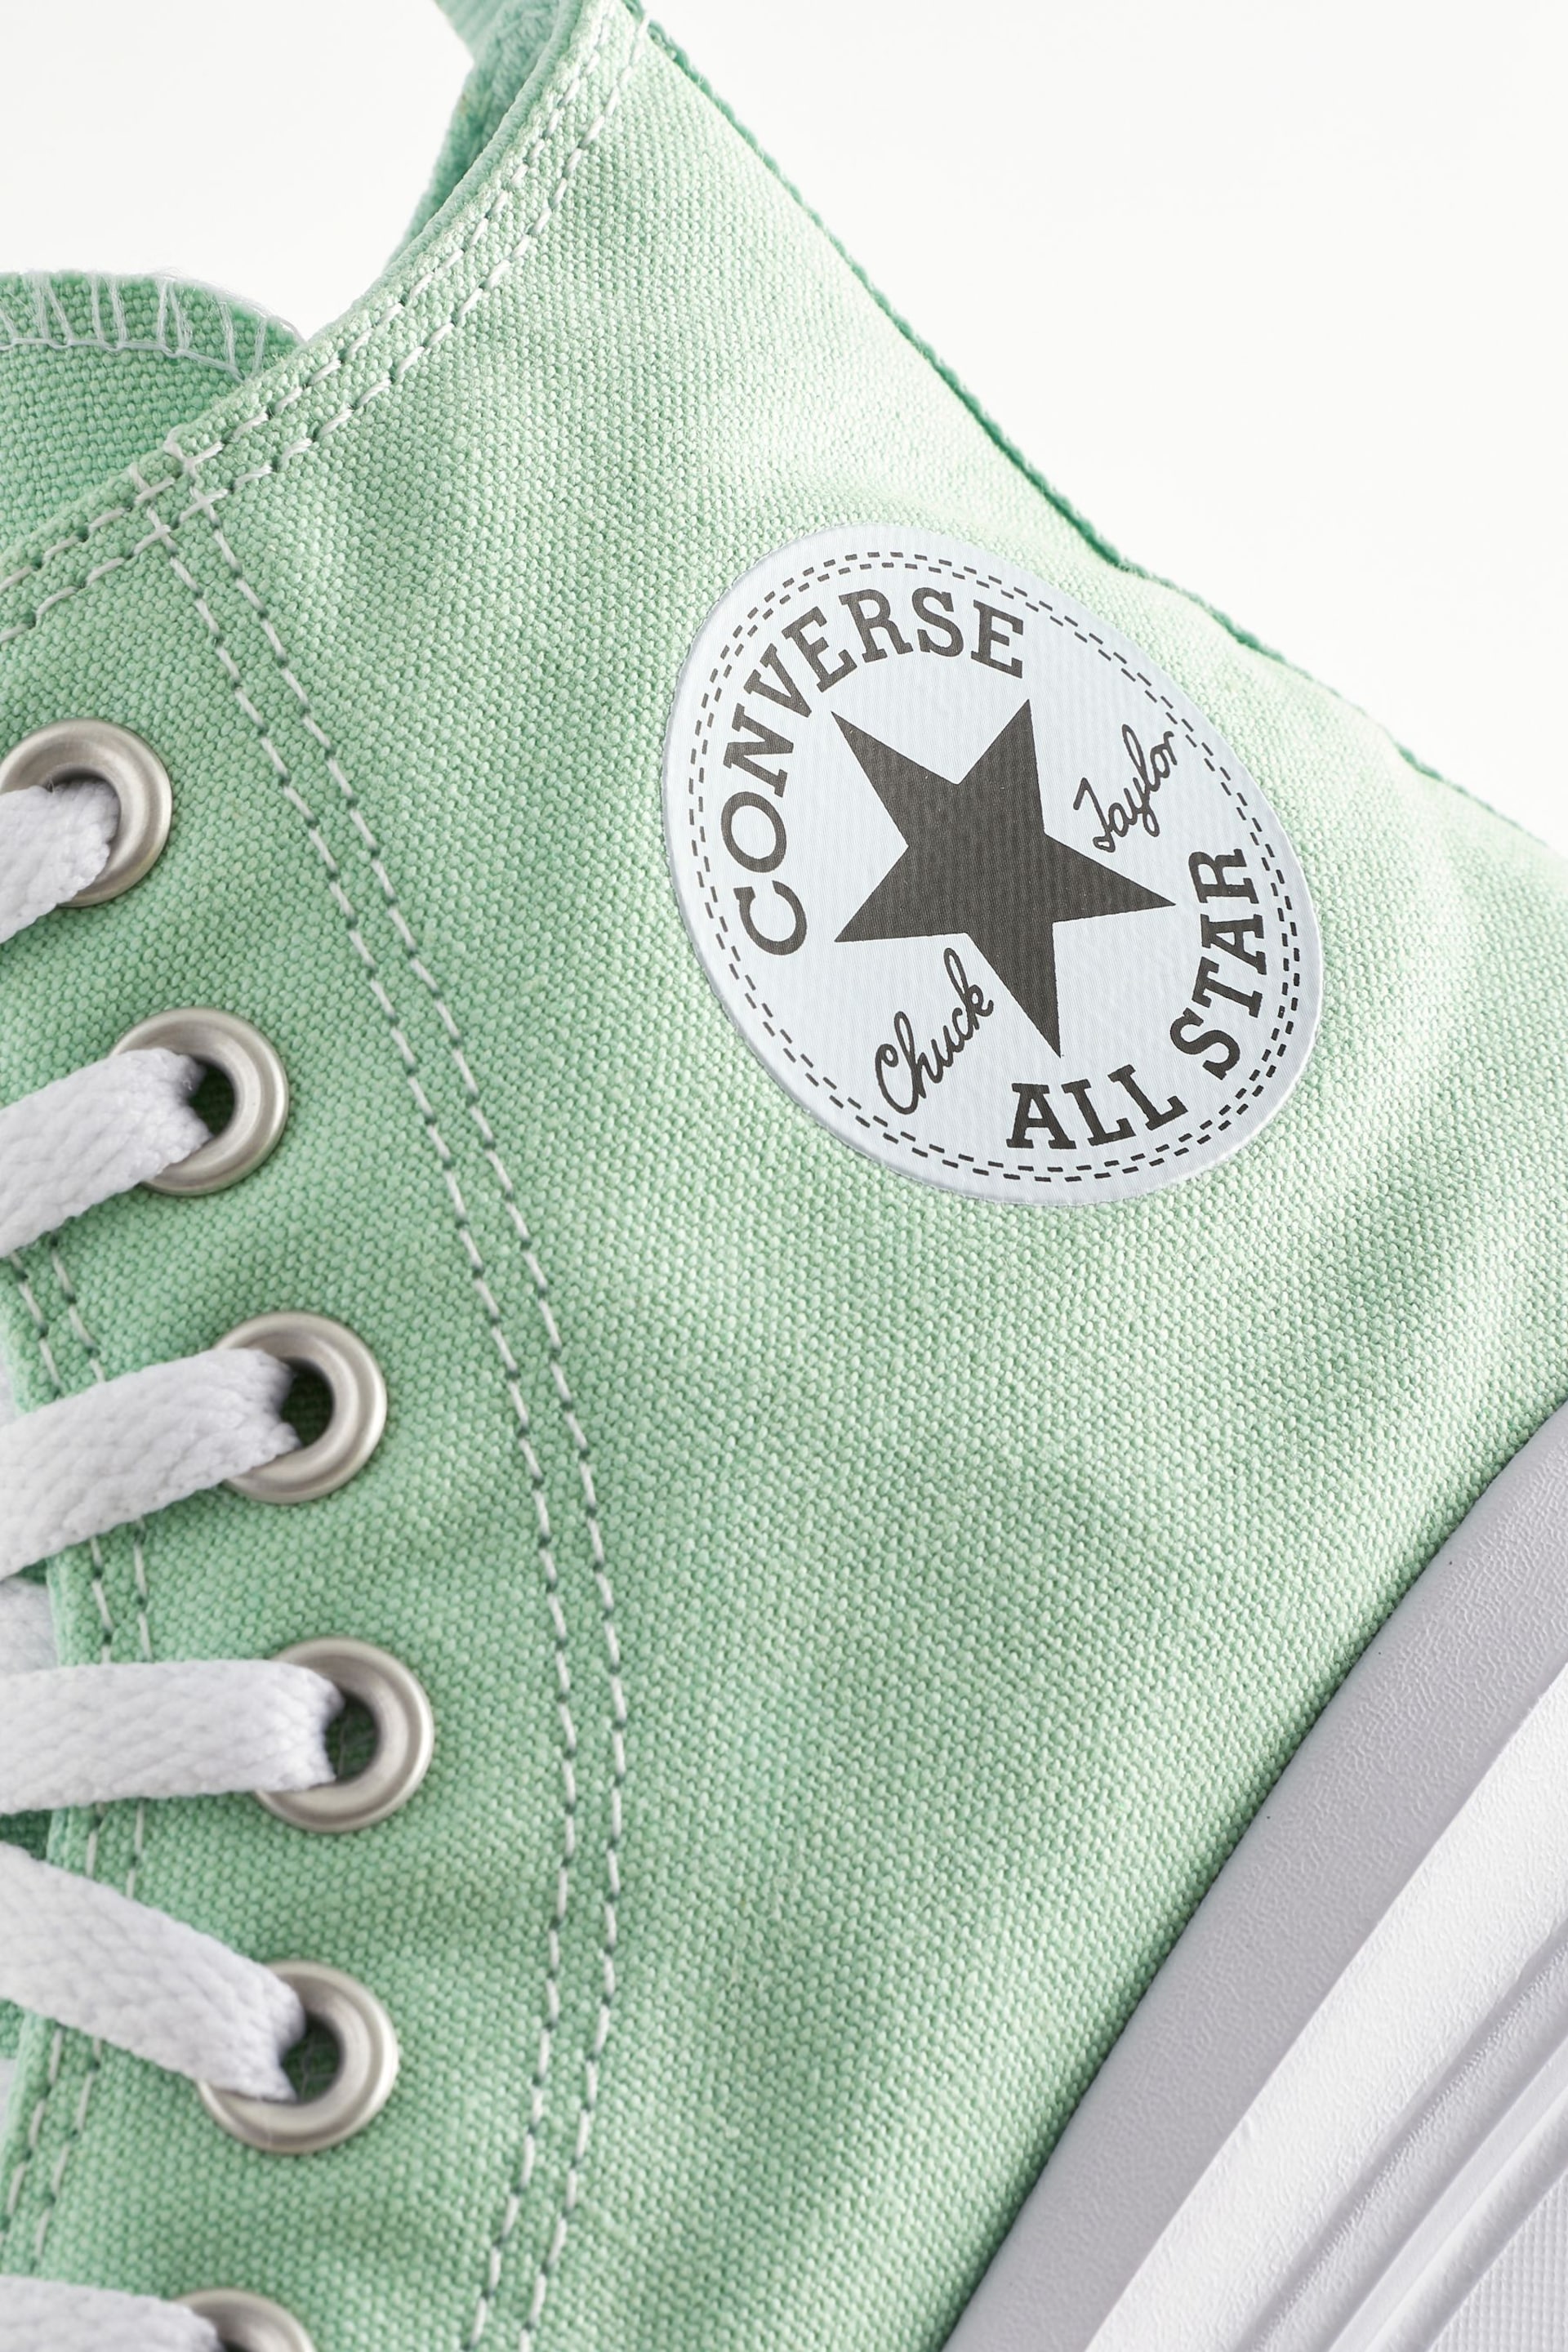 Converse Green Junior Chuck Taylor Move Trainers - Image 7 of 8